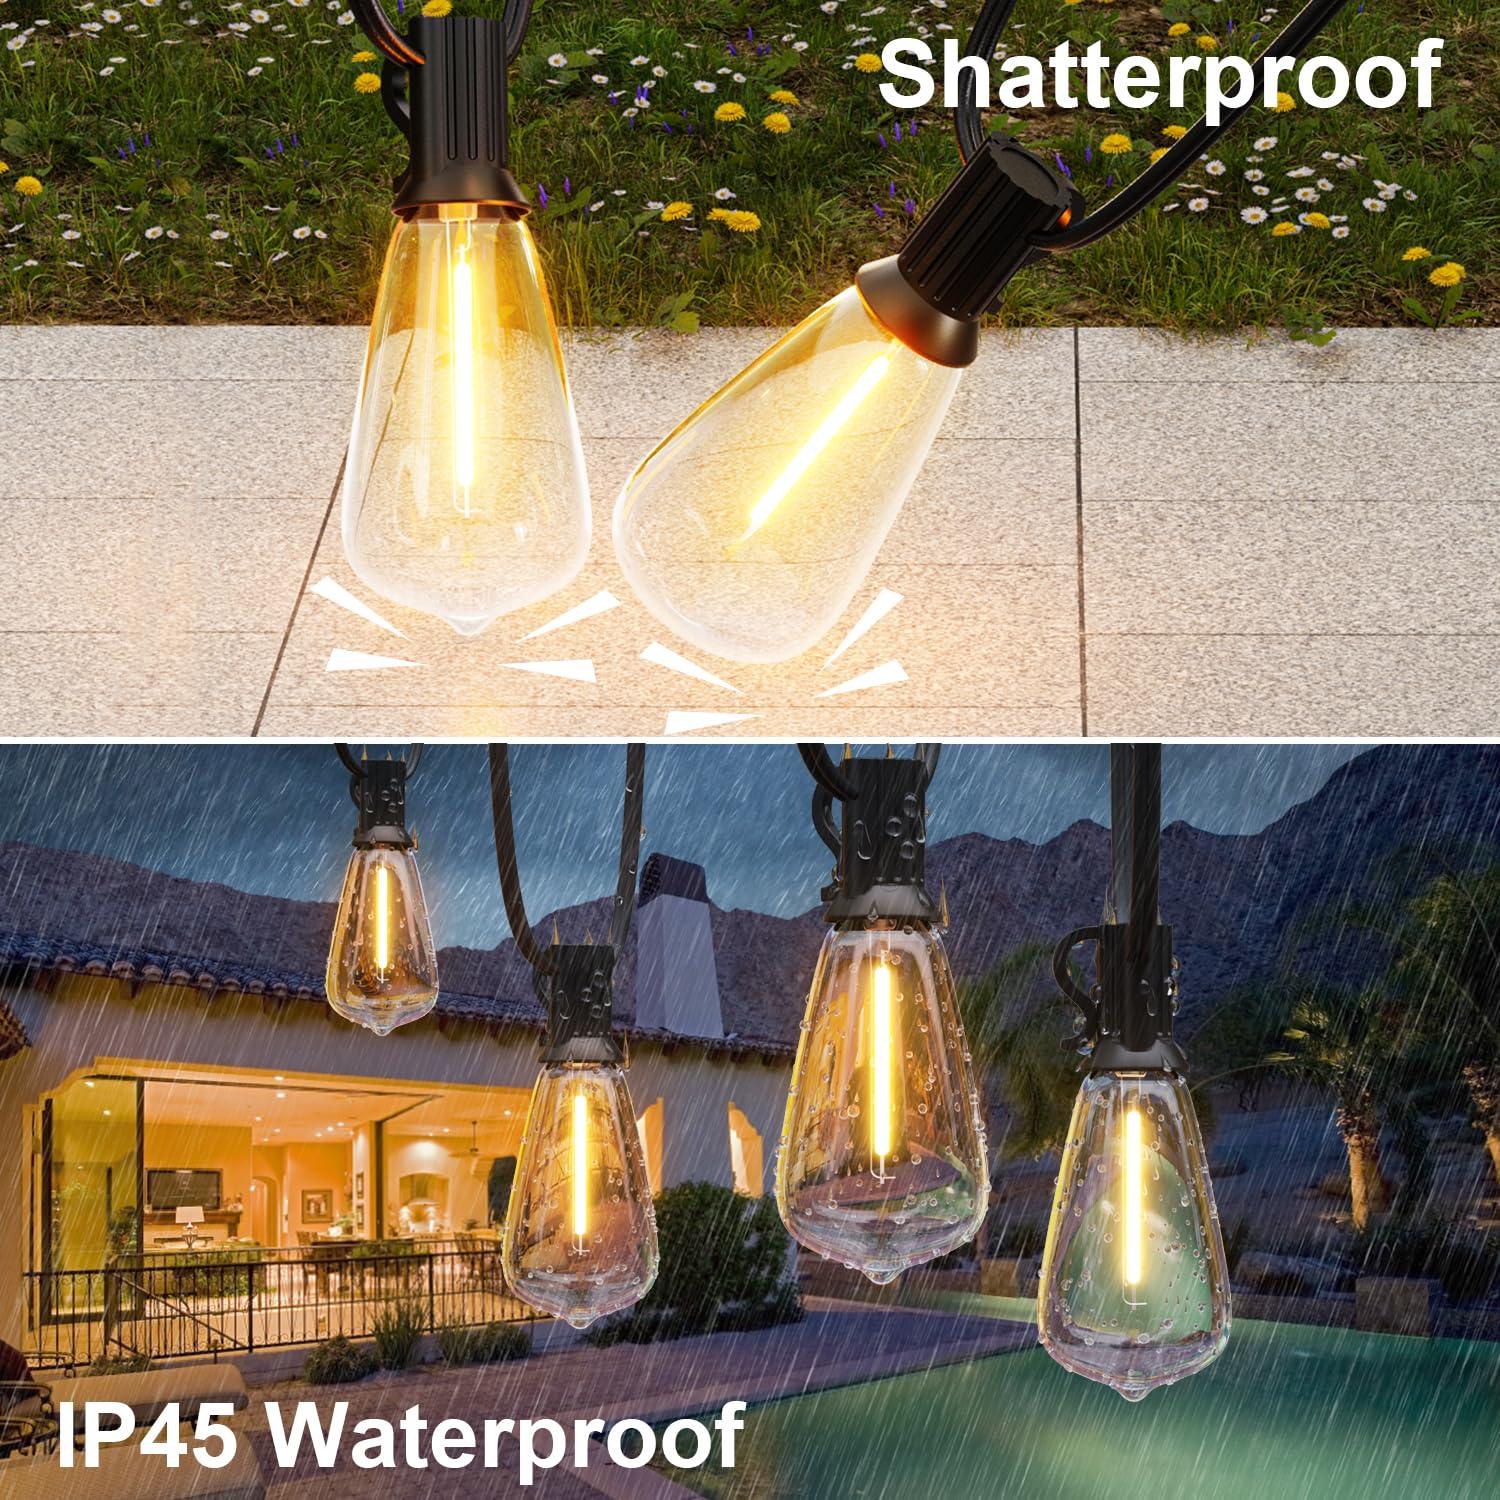 LaPitio 100FT LED Outdoor String Lights for Outside Remote 52 Edison Vintage Bulbs ST38 Dimmable Patio Lights Waterproof Shatterproof Timer for Garden Deck Backyard Yard House Hanging Lighting 2500K